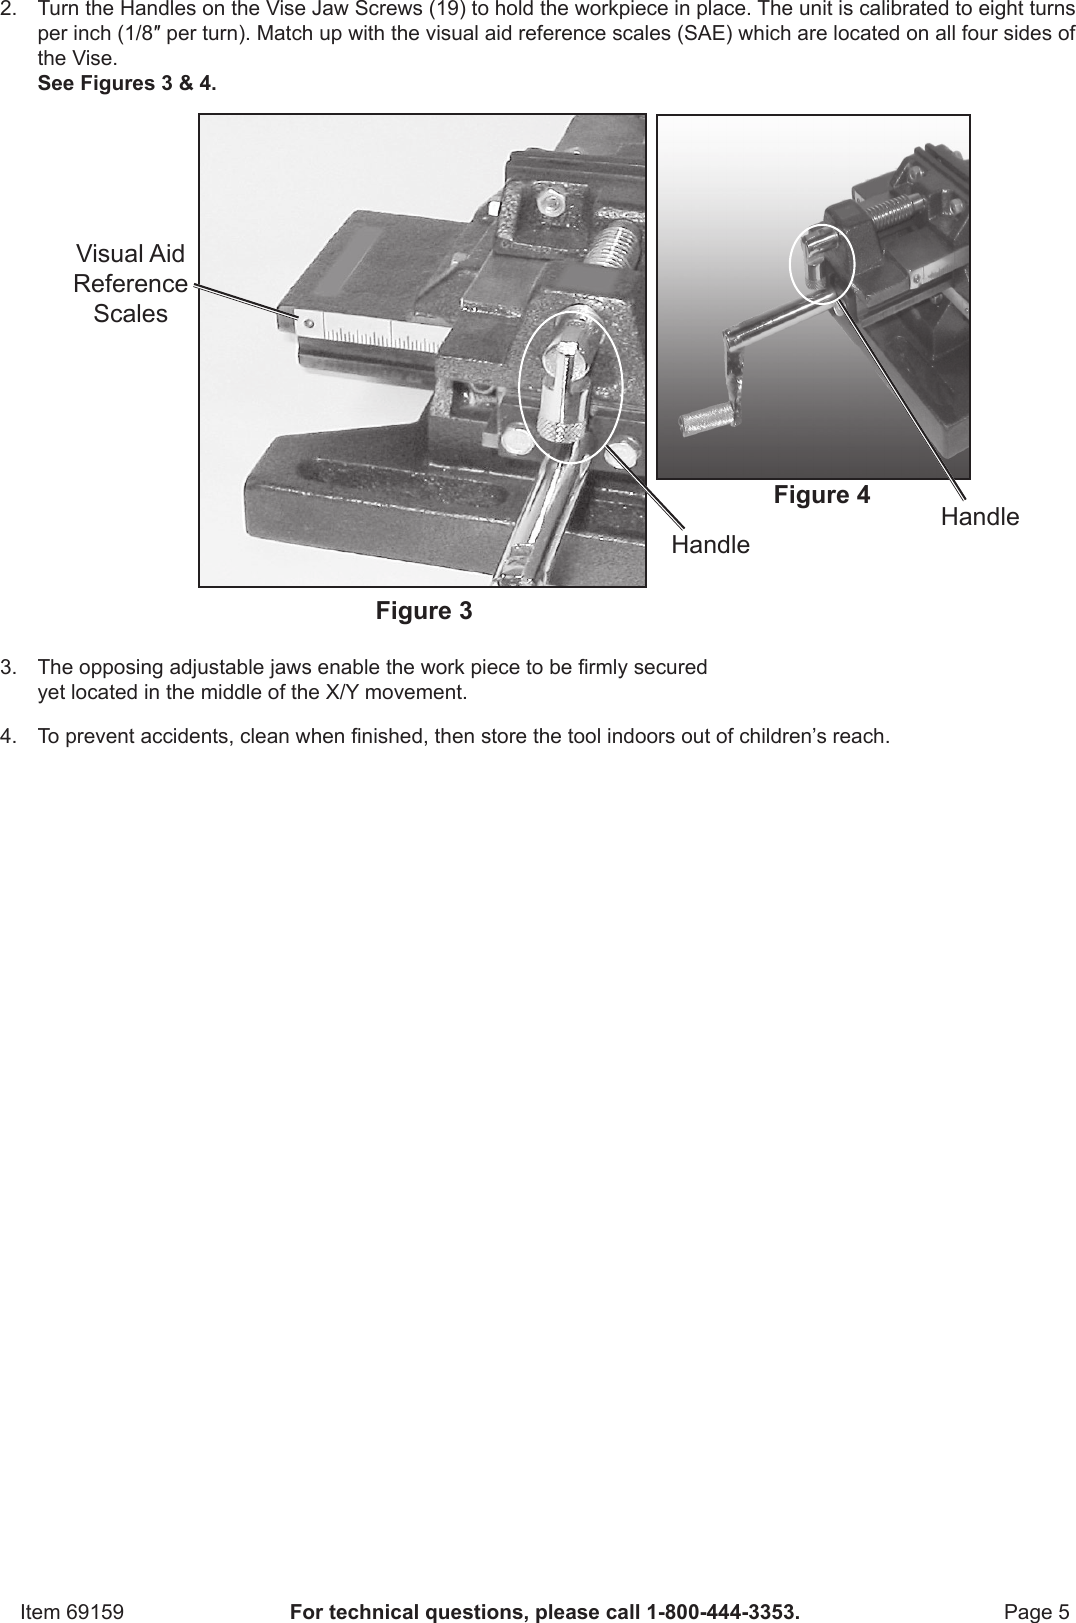 Page 5 of 8 - Harbor-Freight Harbor-Freight-5-In-Rugged-Cast-Iron-Drill-Press-Milling-Vise-Product-Manual-  Harbor-freight-5-in-rugged-cast-iron-drill-press-milling-vise-product-manual